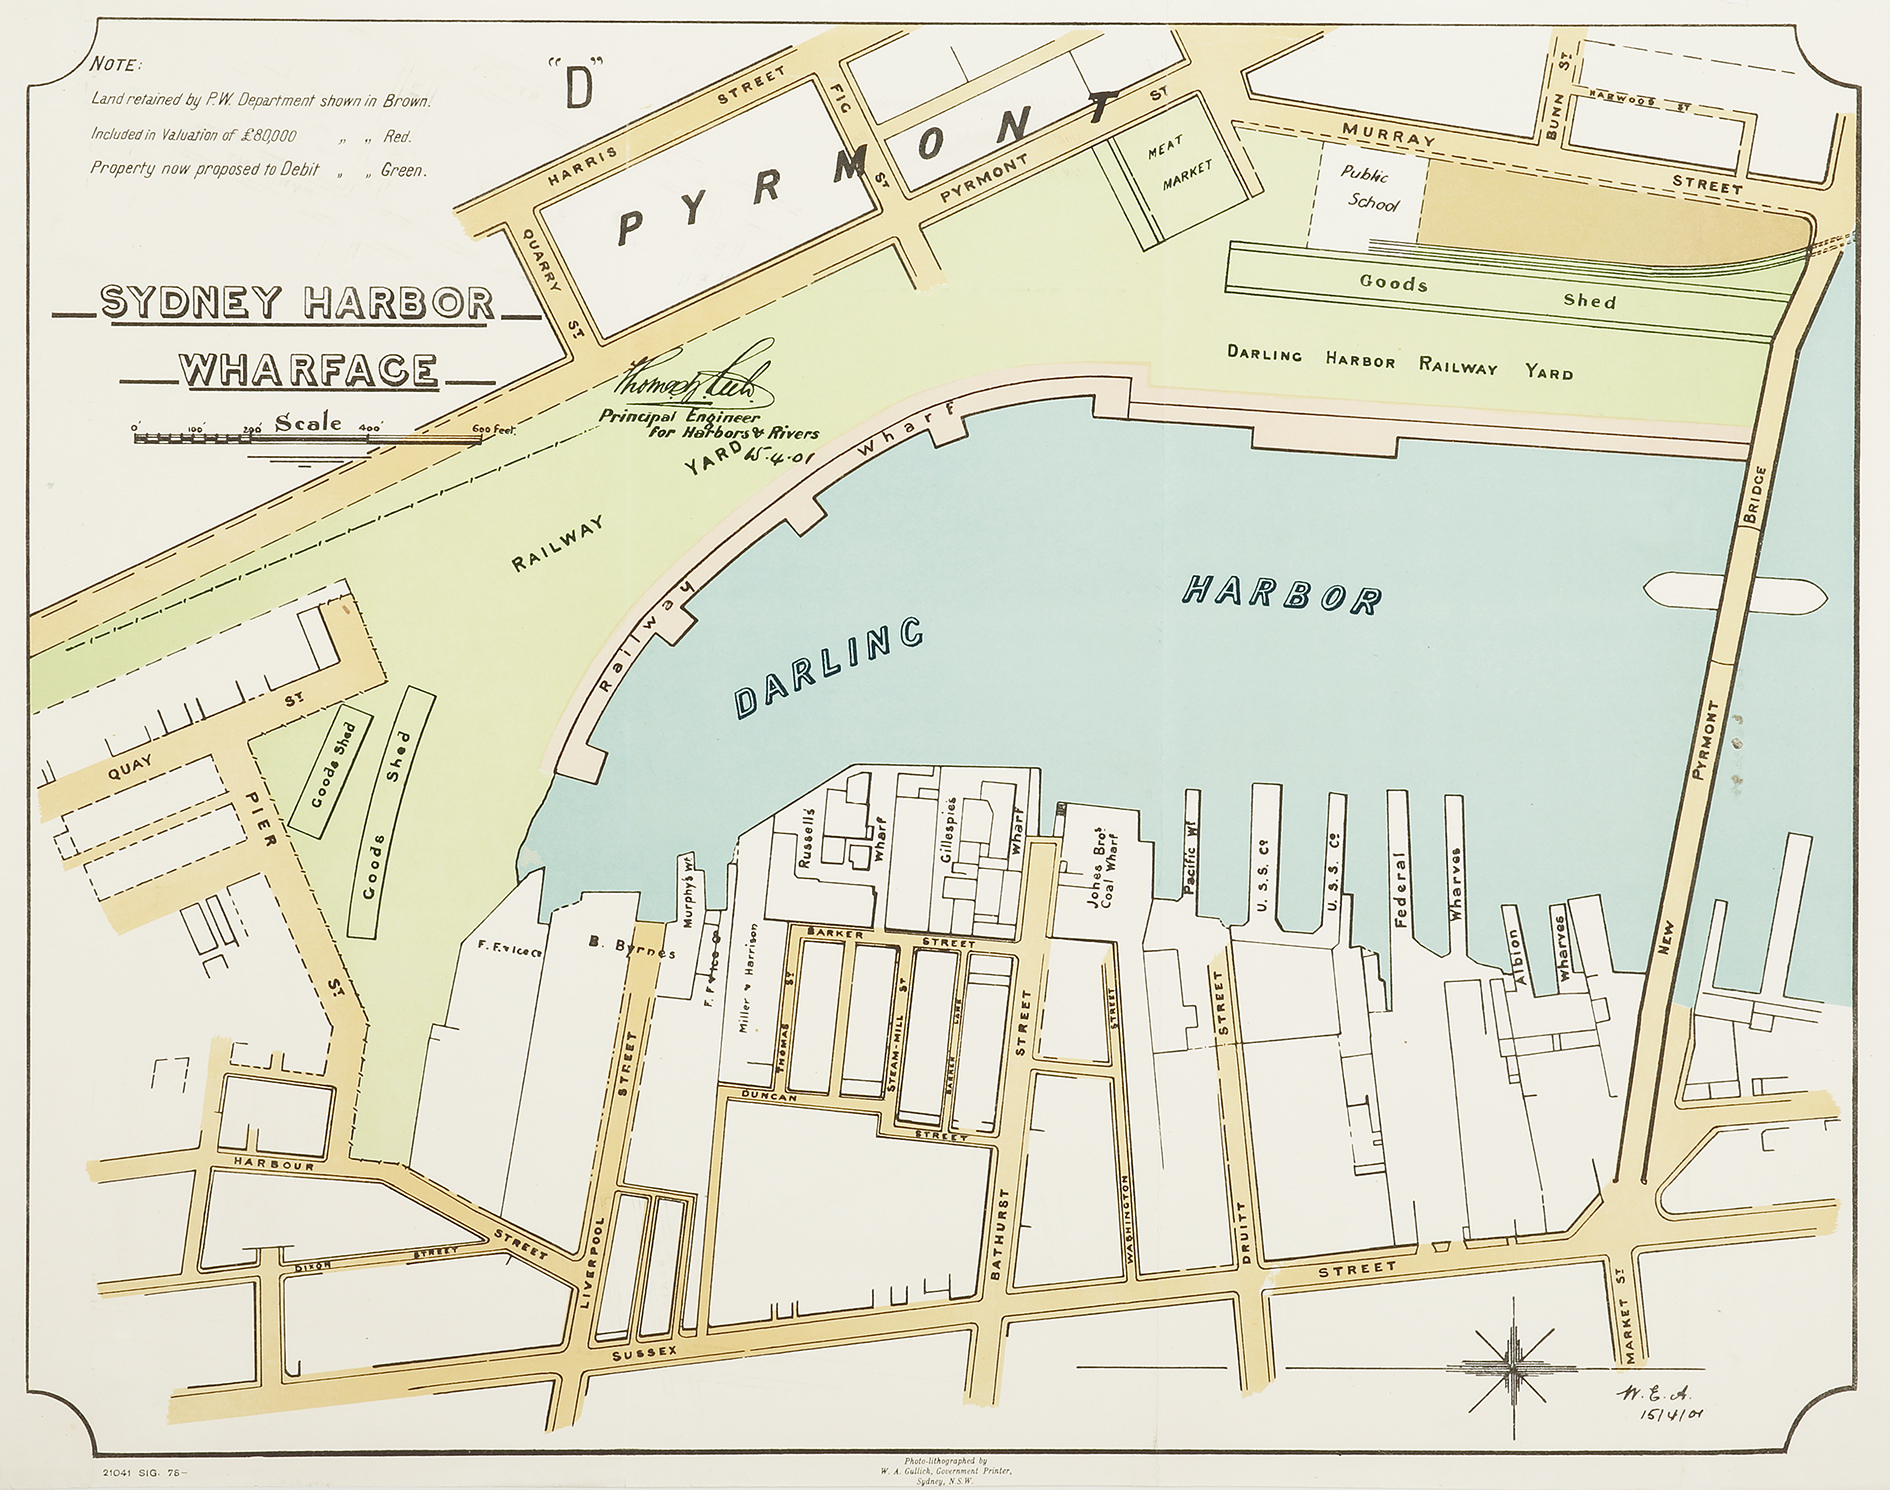 [Cockle Bay] Sydney Harbor Wharfage - Antique Map from 1903